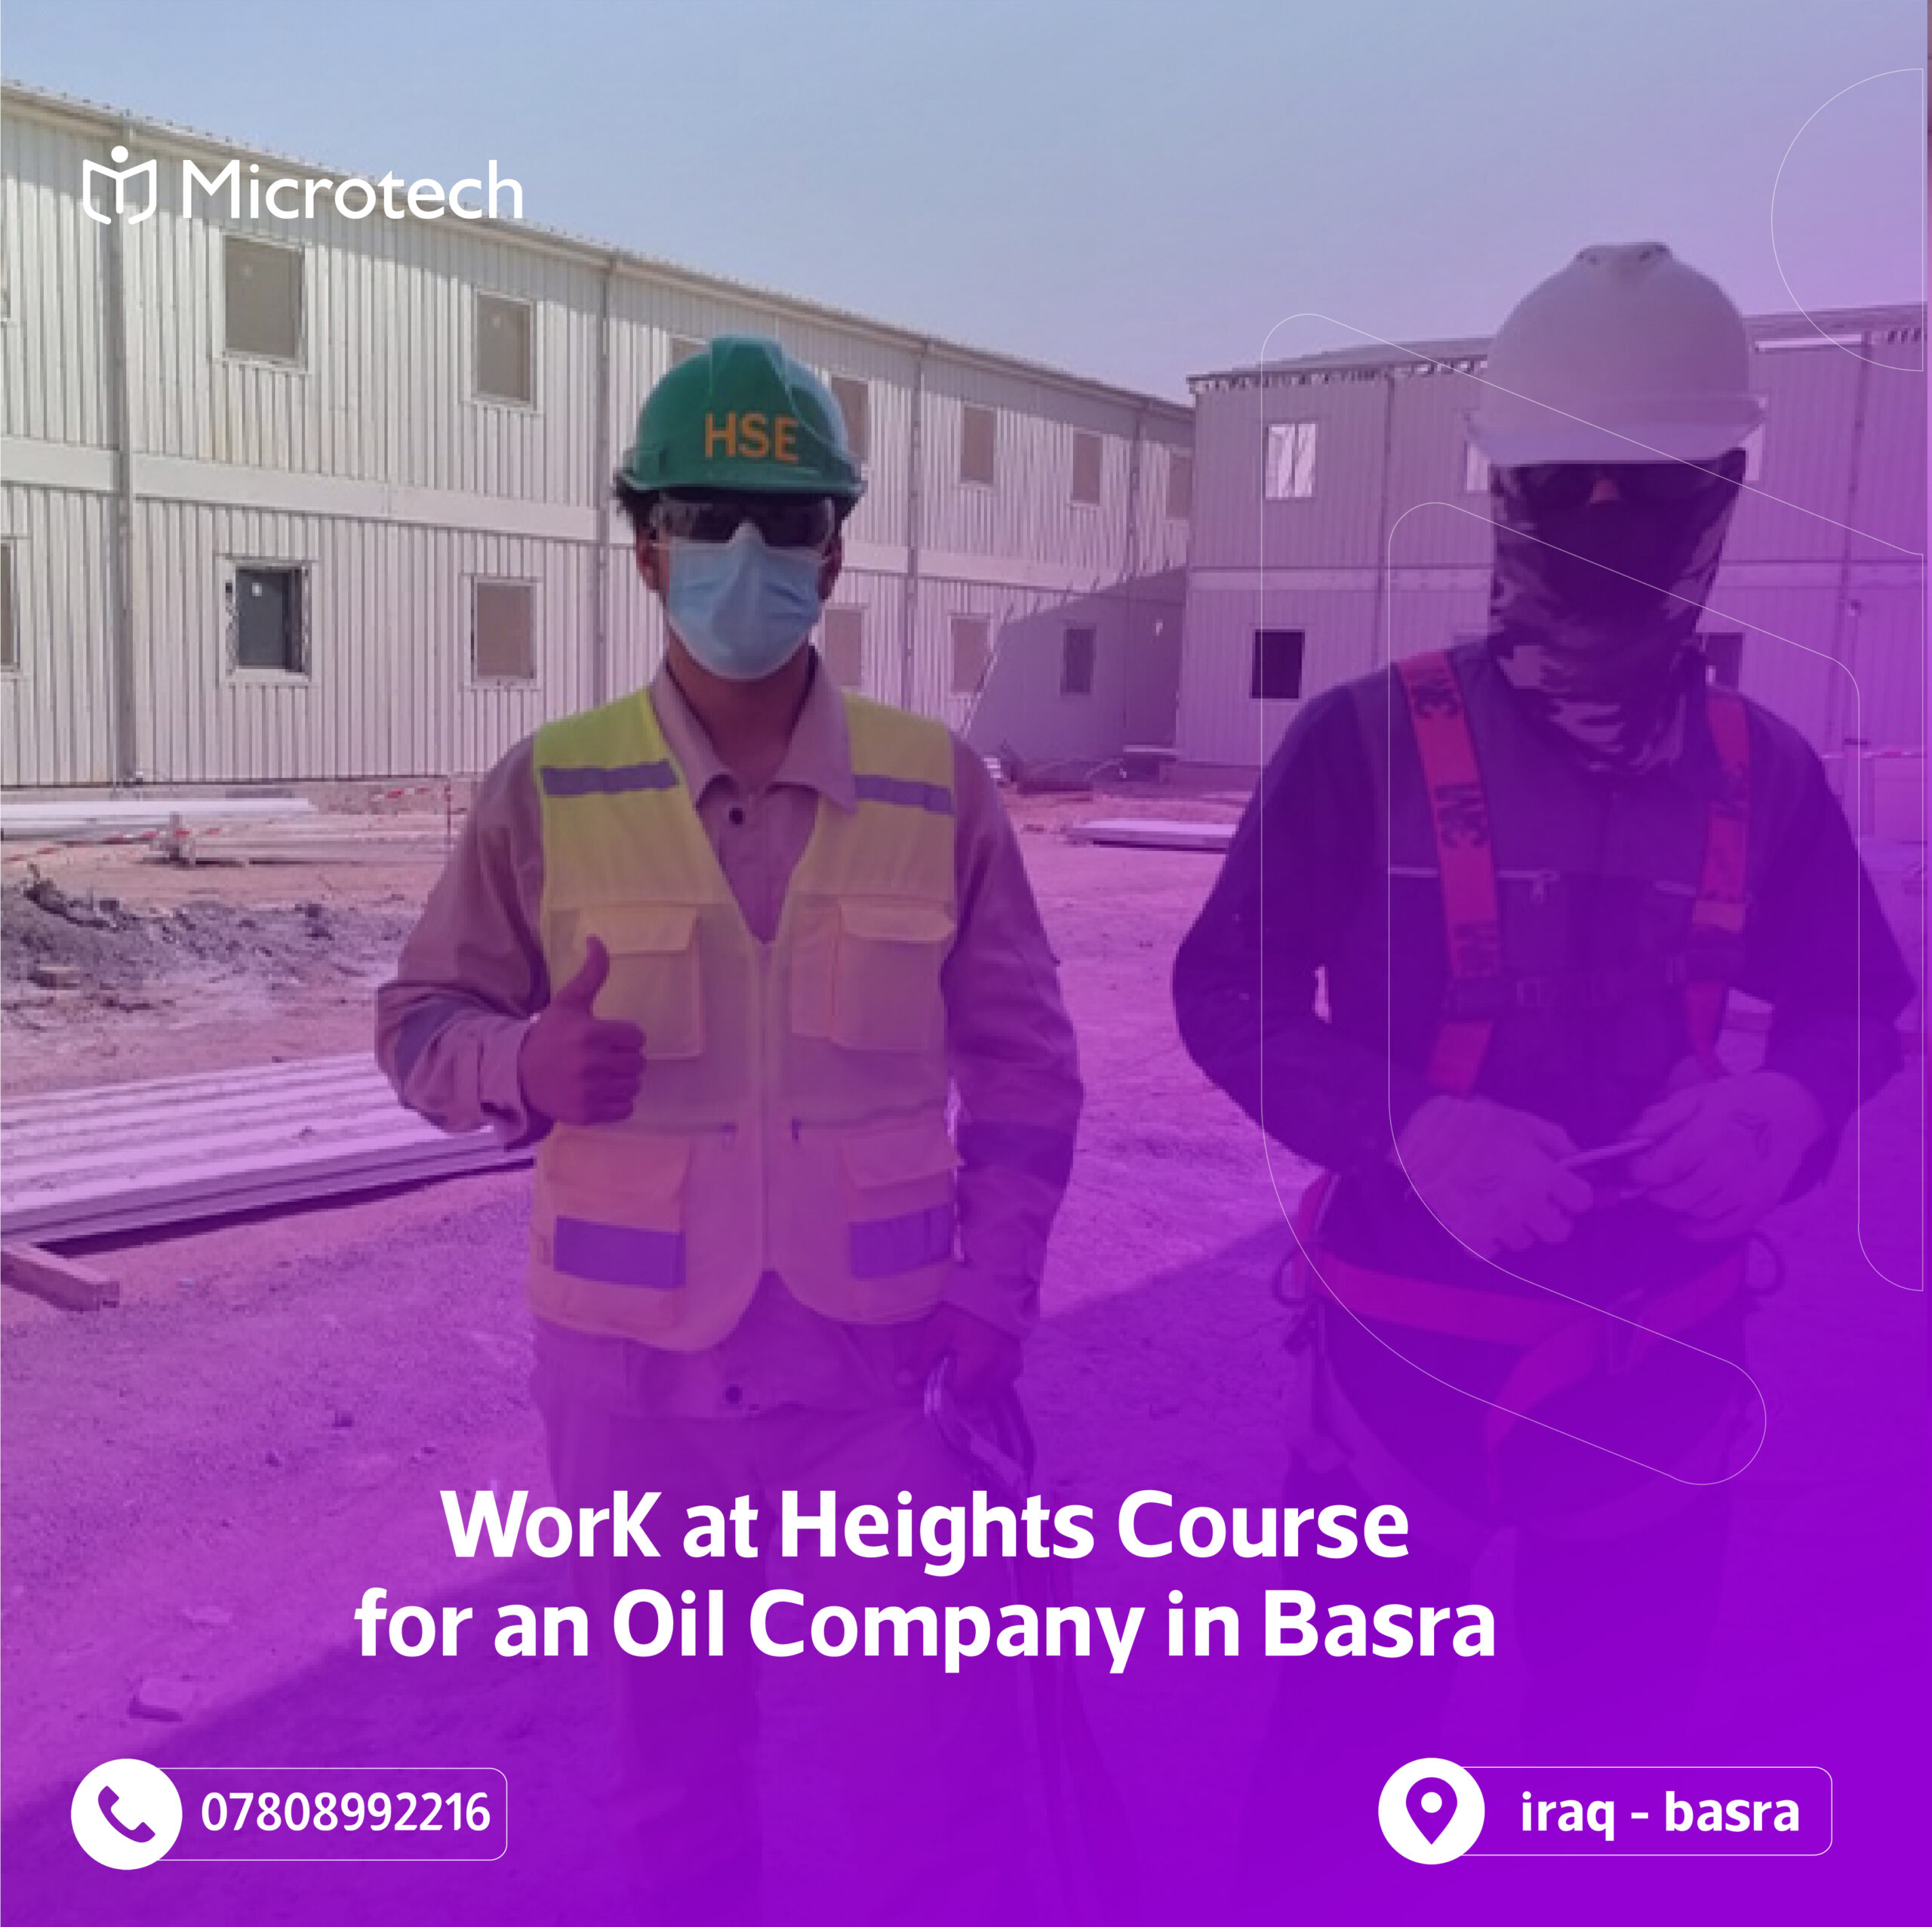 Working at Heights Course